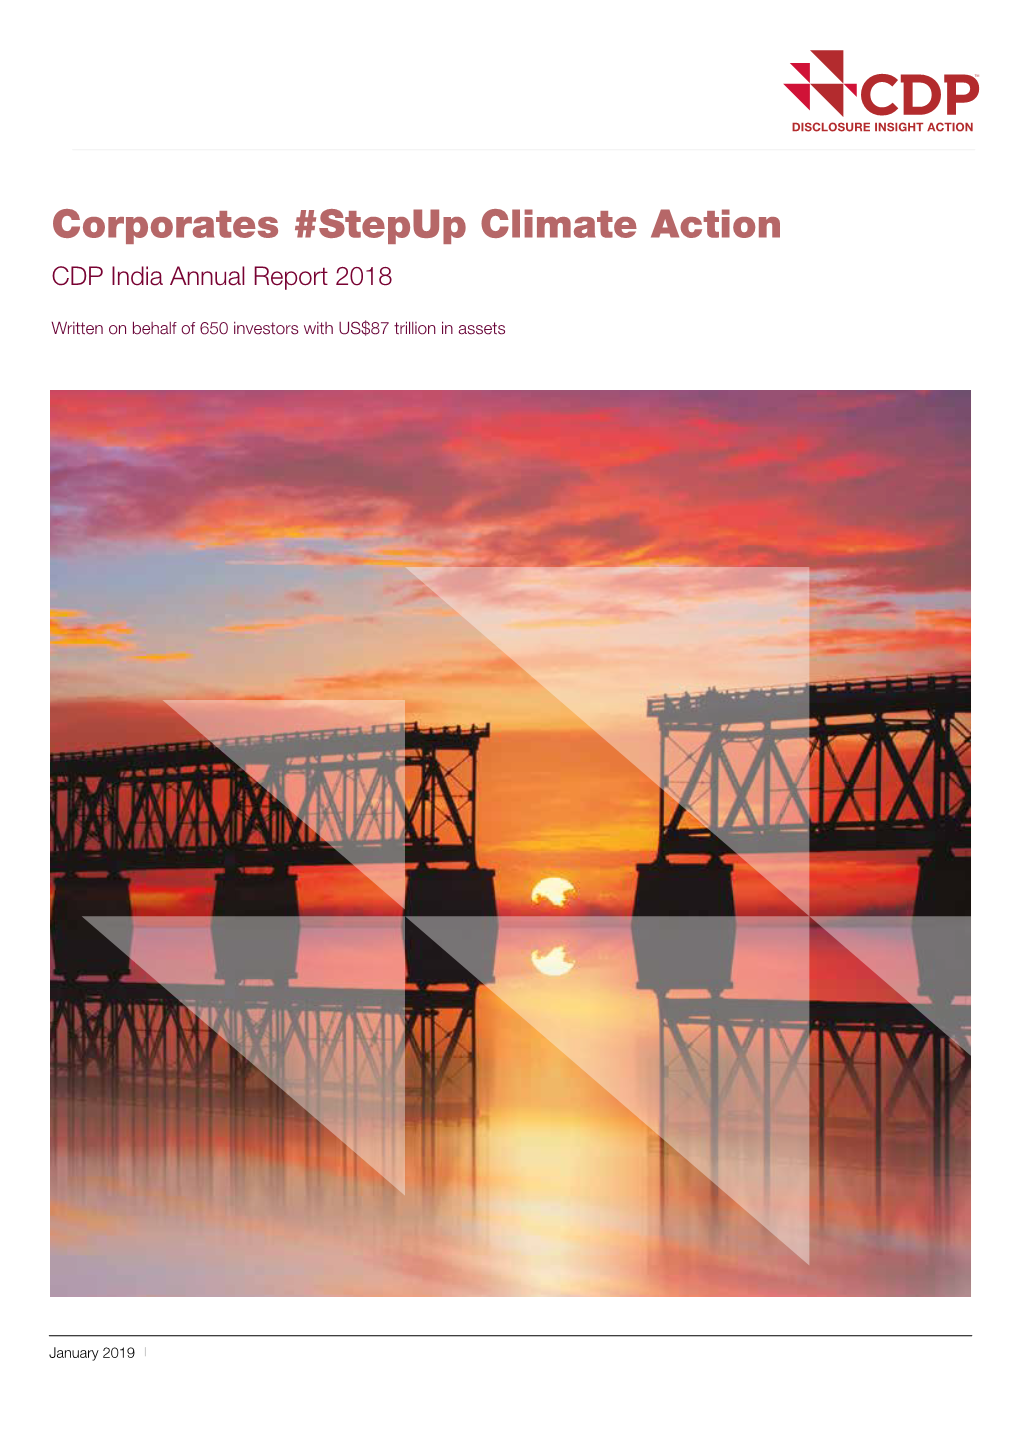 Corporates #Stepup Climate Action CDP India Annual Report 2018